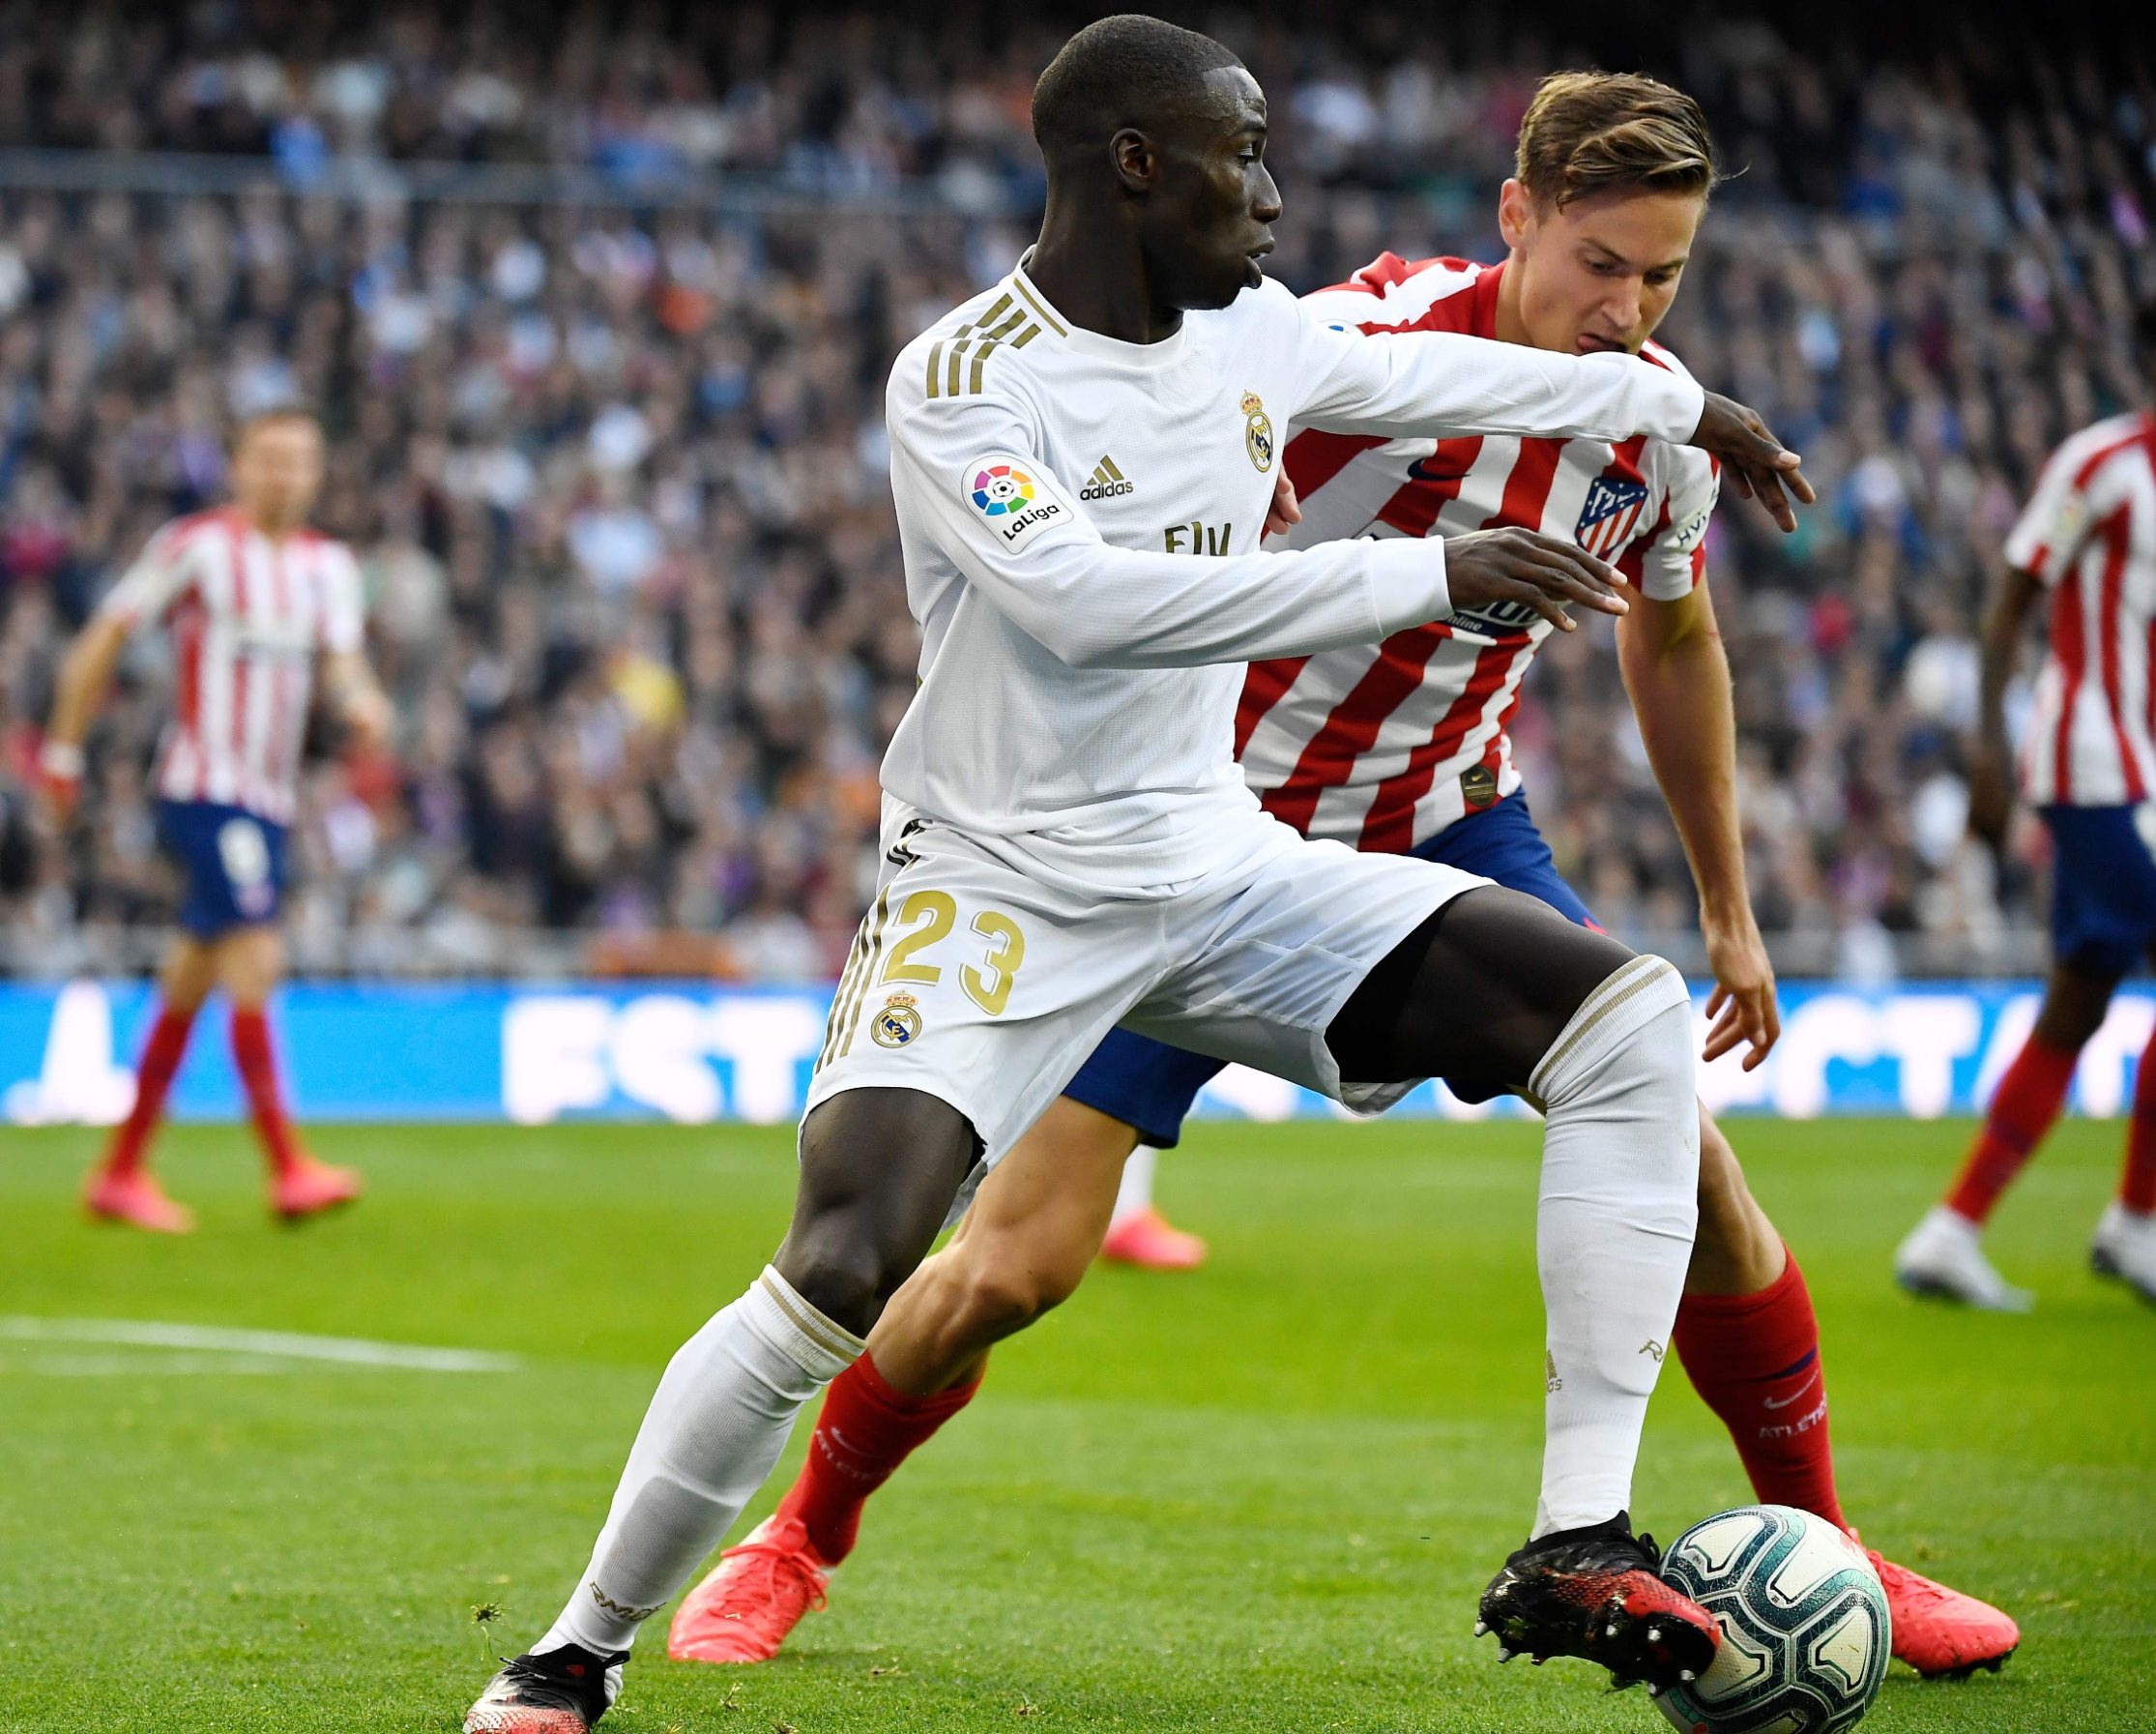 Real Madrid's French defender Ferland Mendy (L) vies with Atletico Madrid's Spanish midfielder Marcos Llorente during the Spanish league football match between Real Madrid CF and Club Atletico de Madrid at the Santiago Bernabeu stadium in Madrid on February 1, 2020. (Photo by PIERRE-PHILIPPE MARCOU / AFP)